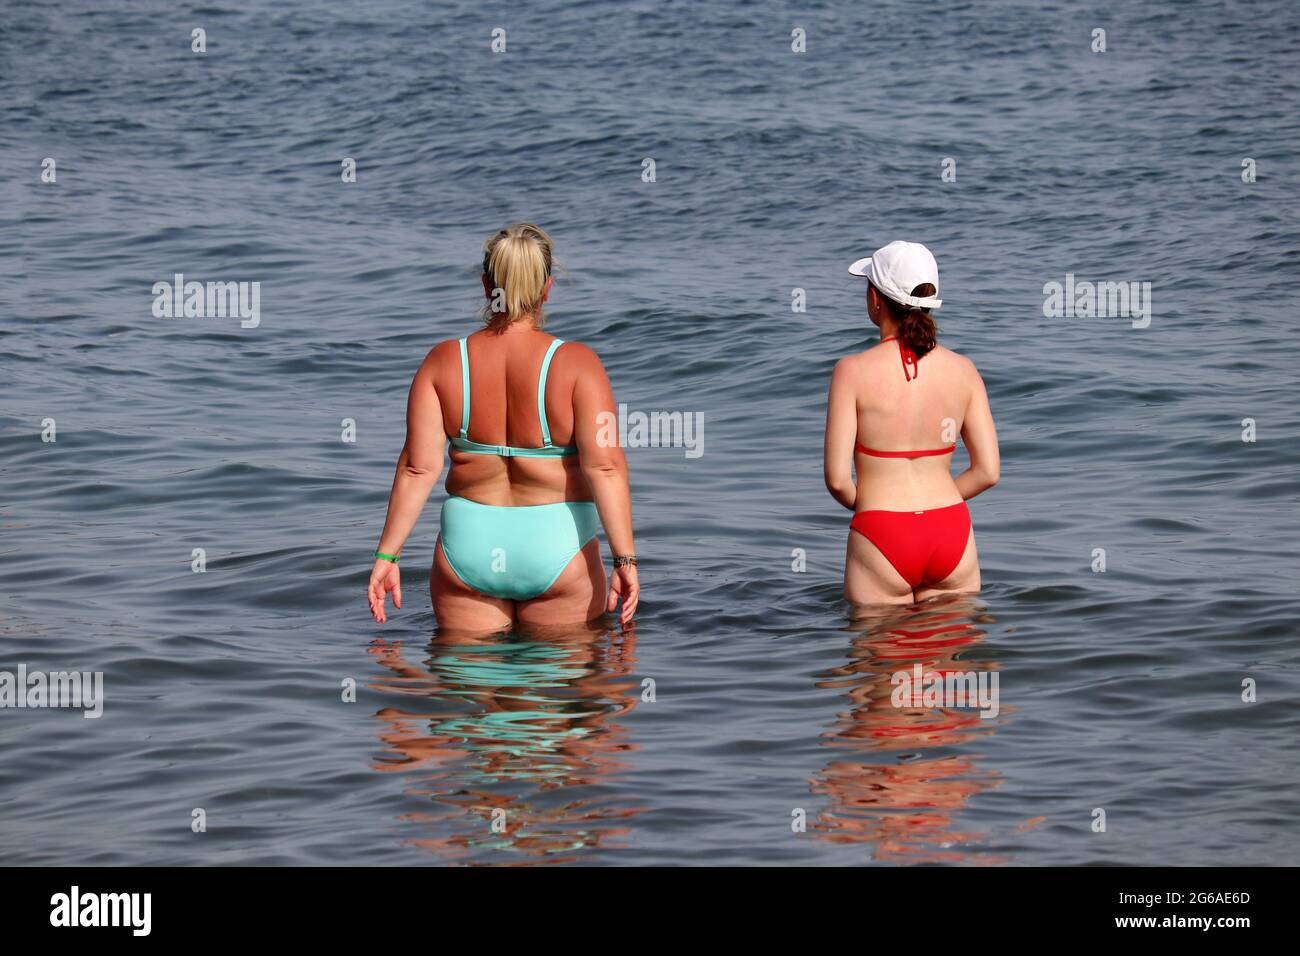 Fat and slim girls in bikini going to swim in sea water, rear view. Two girlfriends on a summer beach, overweight and dieting concept Stock Photo